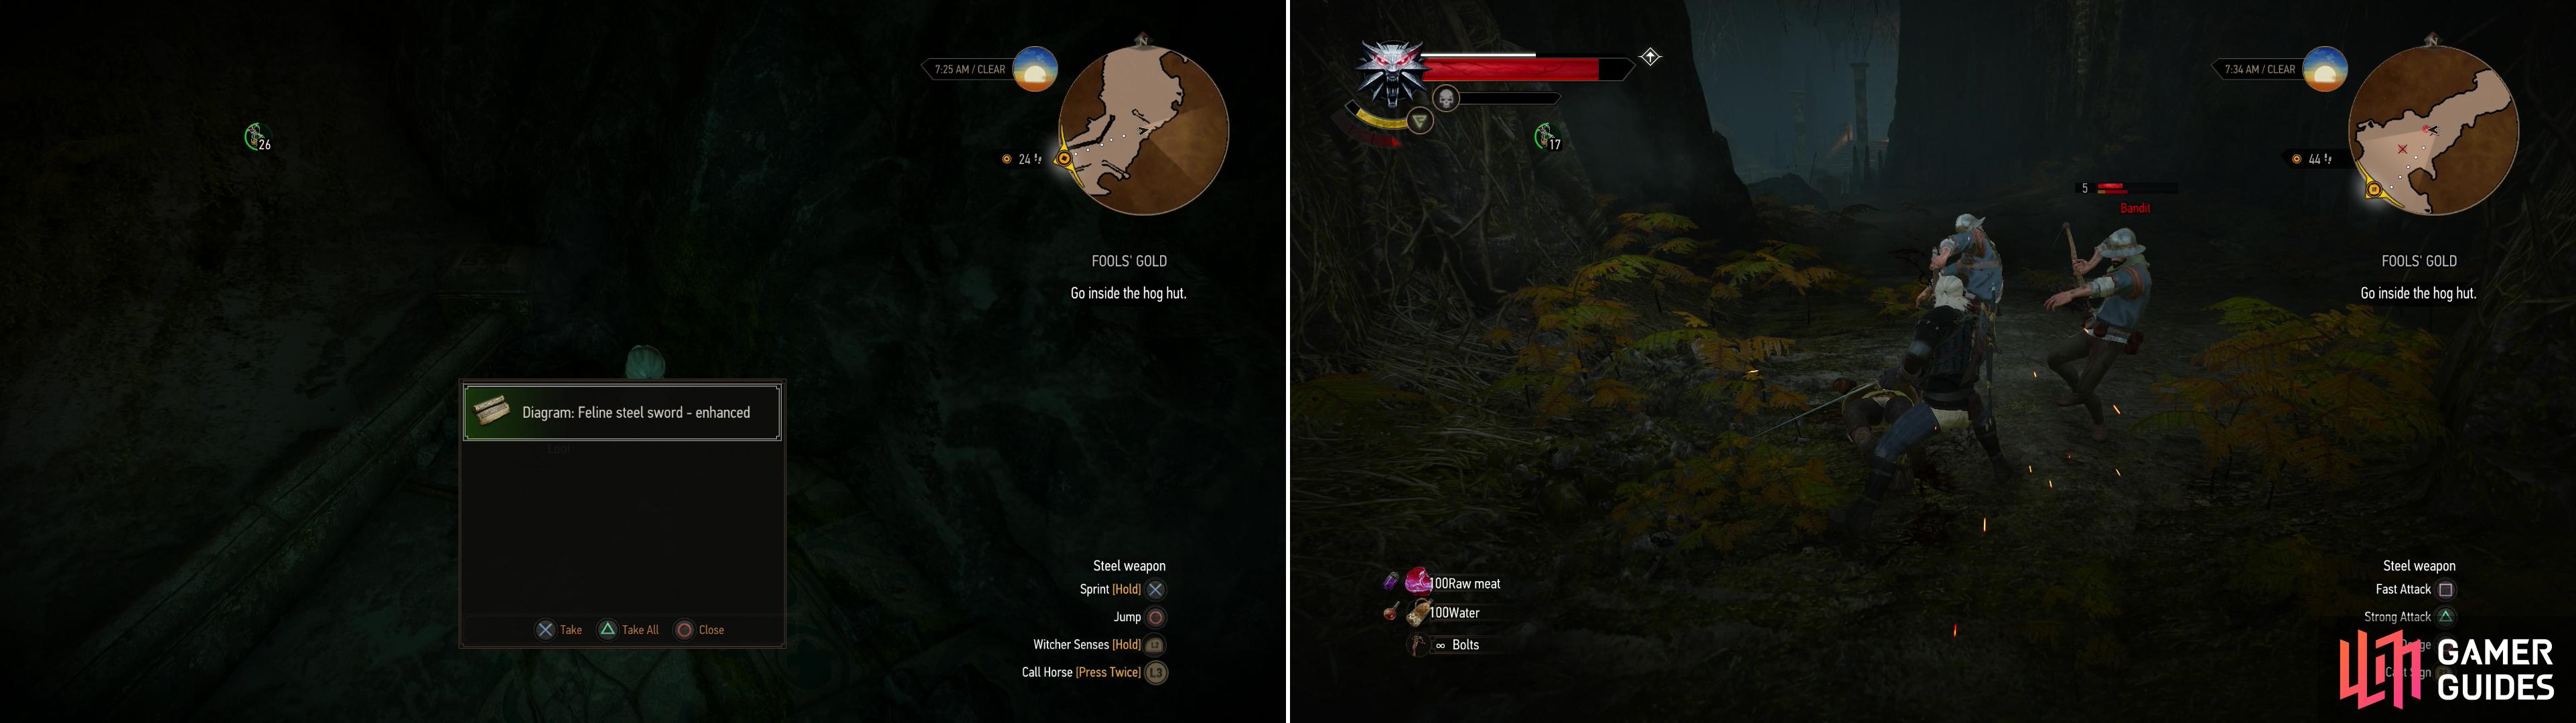 In the cave where the "hog hut" is located you can find the Diagram: Feline Steel Sword - Enhanced (left). There are also Bandits in and around the cave that need to be put down (right).